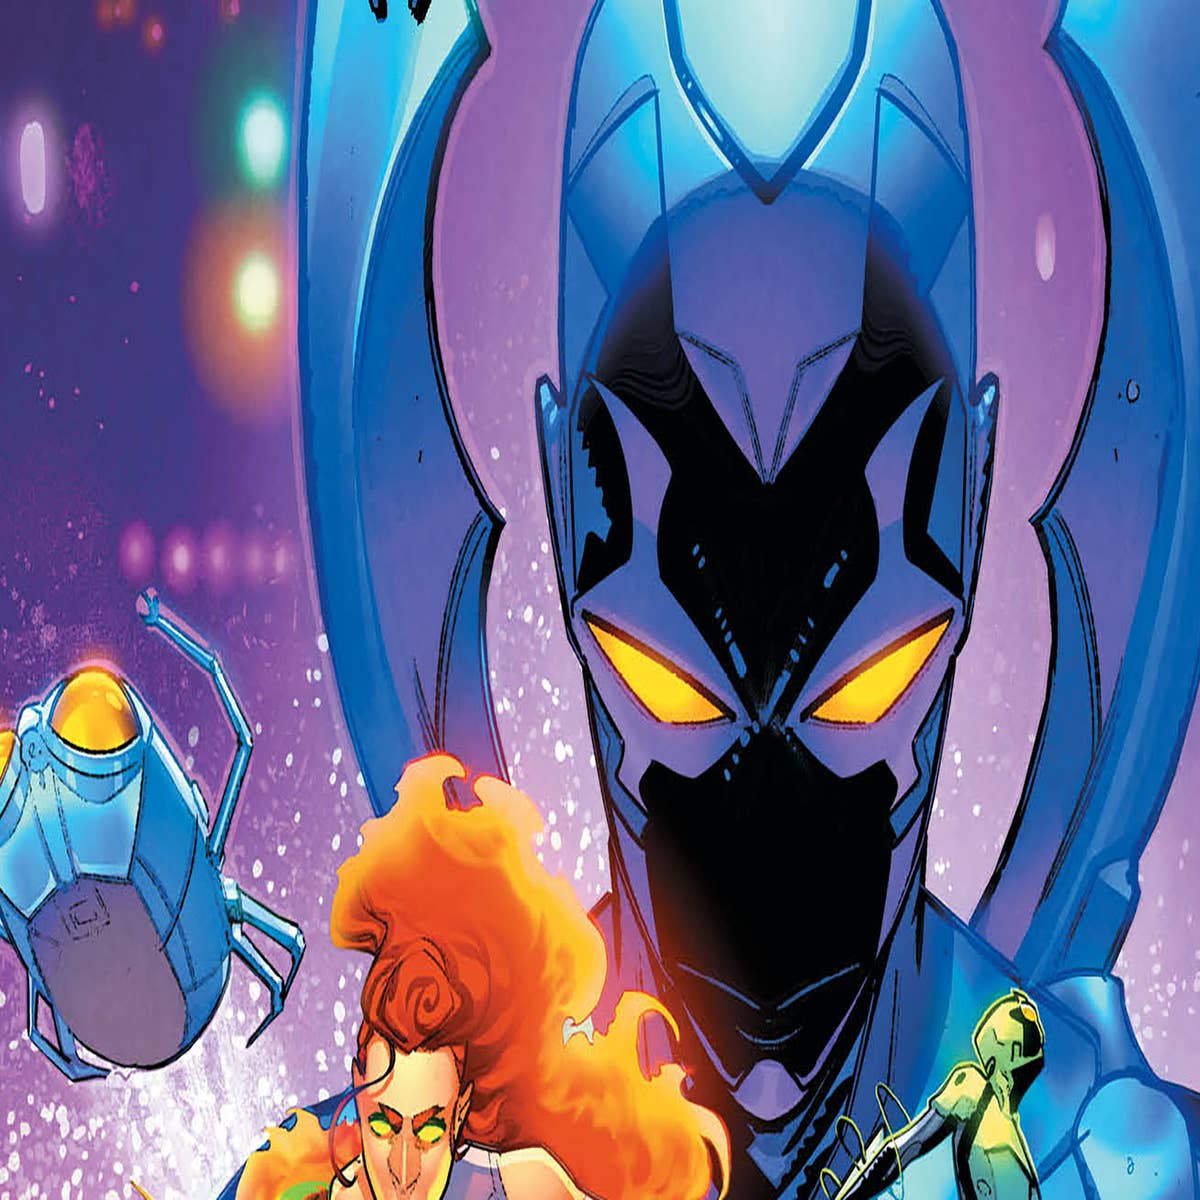 Blue Beetle' Director Reveals Conditions For A Sequel